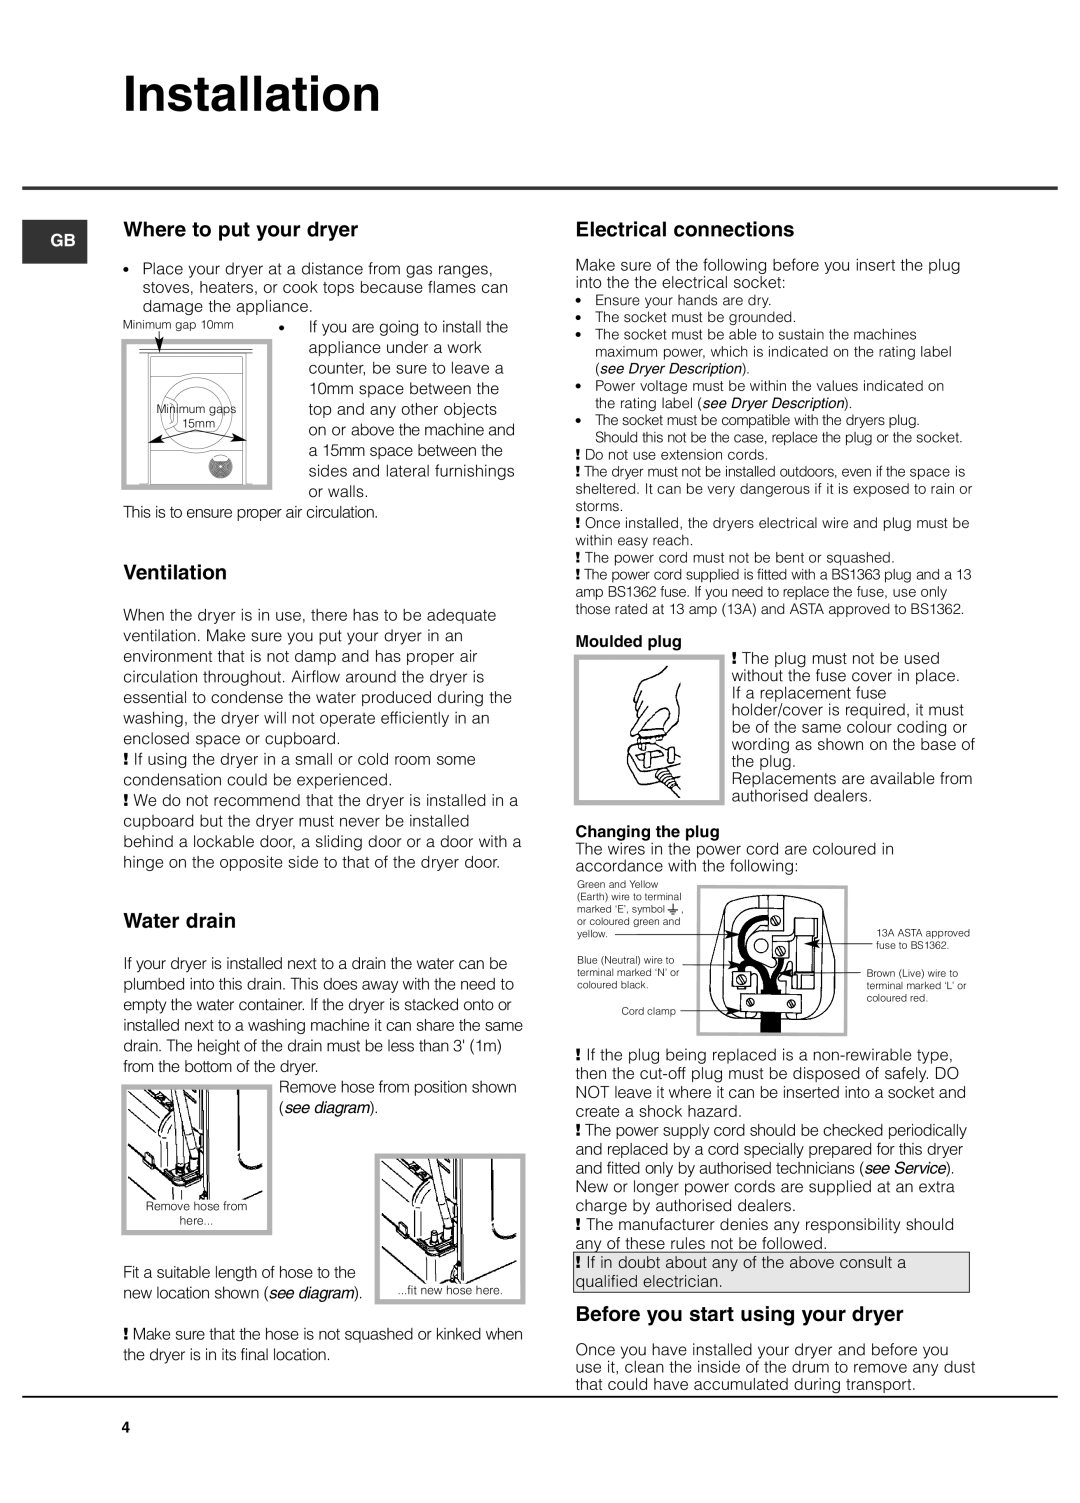 Hotpoint TCEl 87B Experience manual Installation, Where to put your dryer, Electrical connections, Ventilation, Water drain 